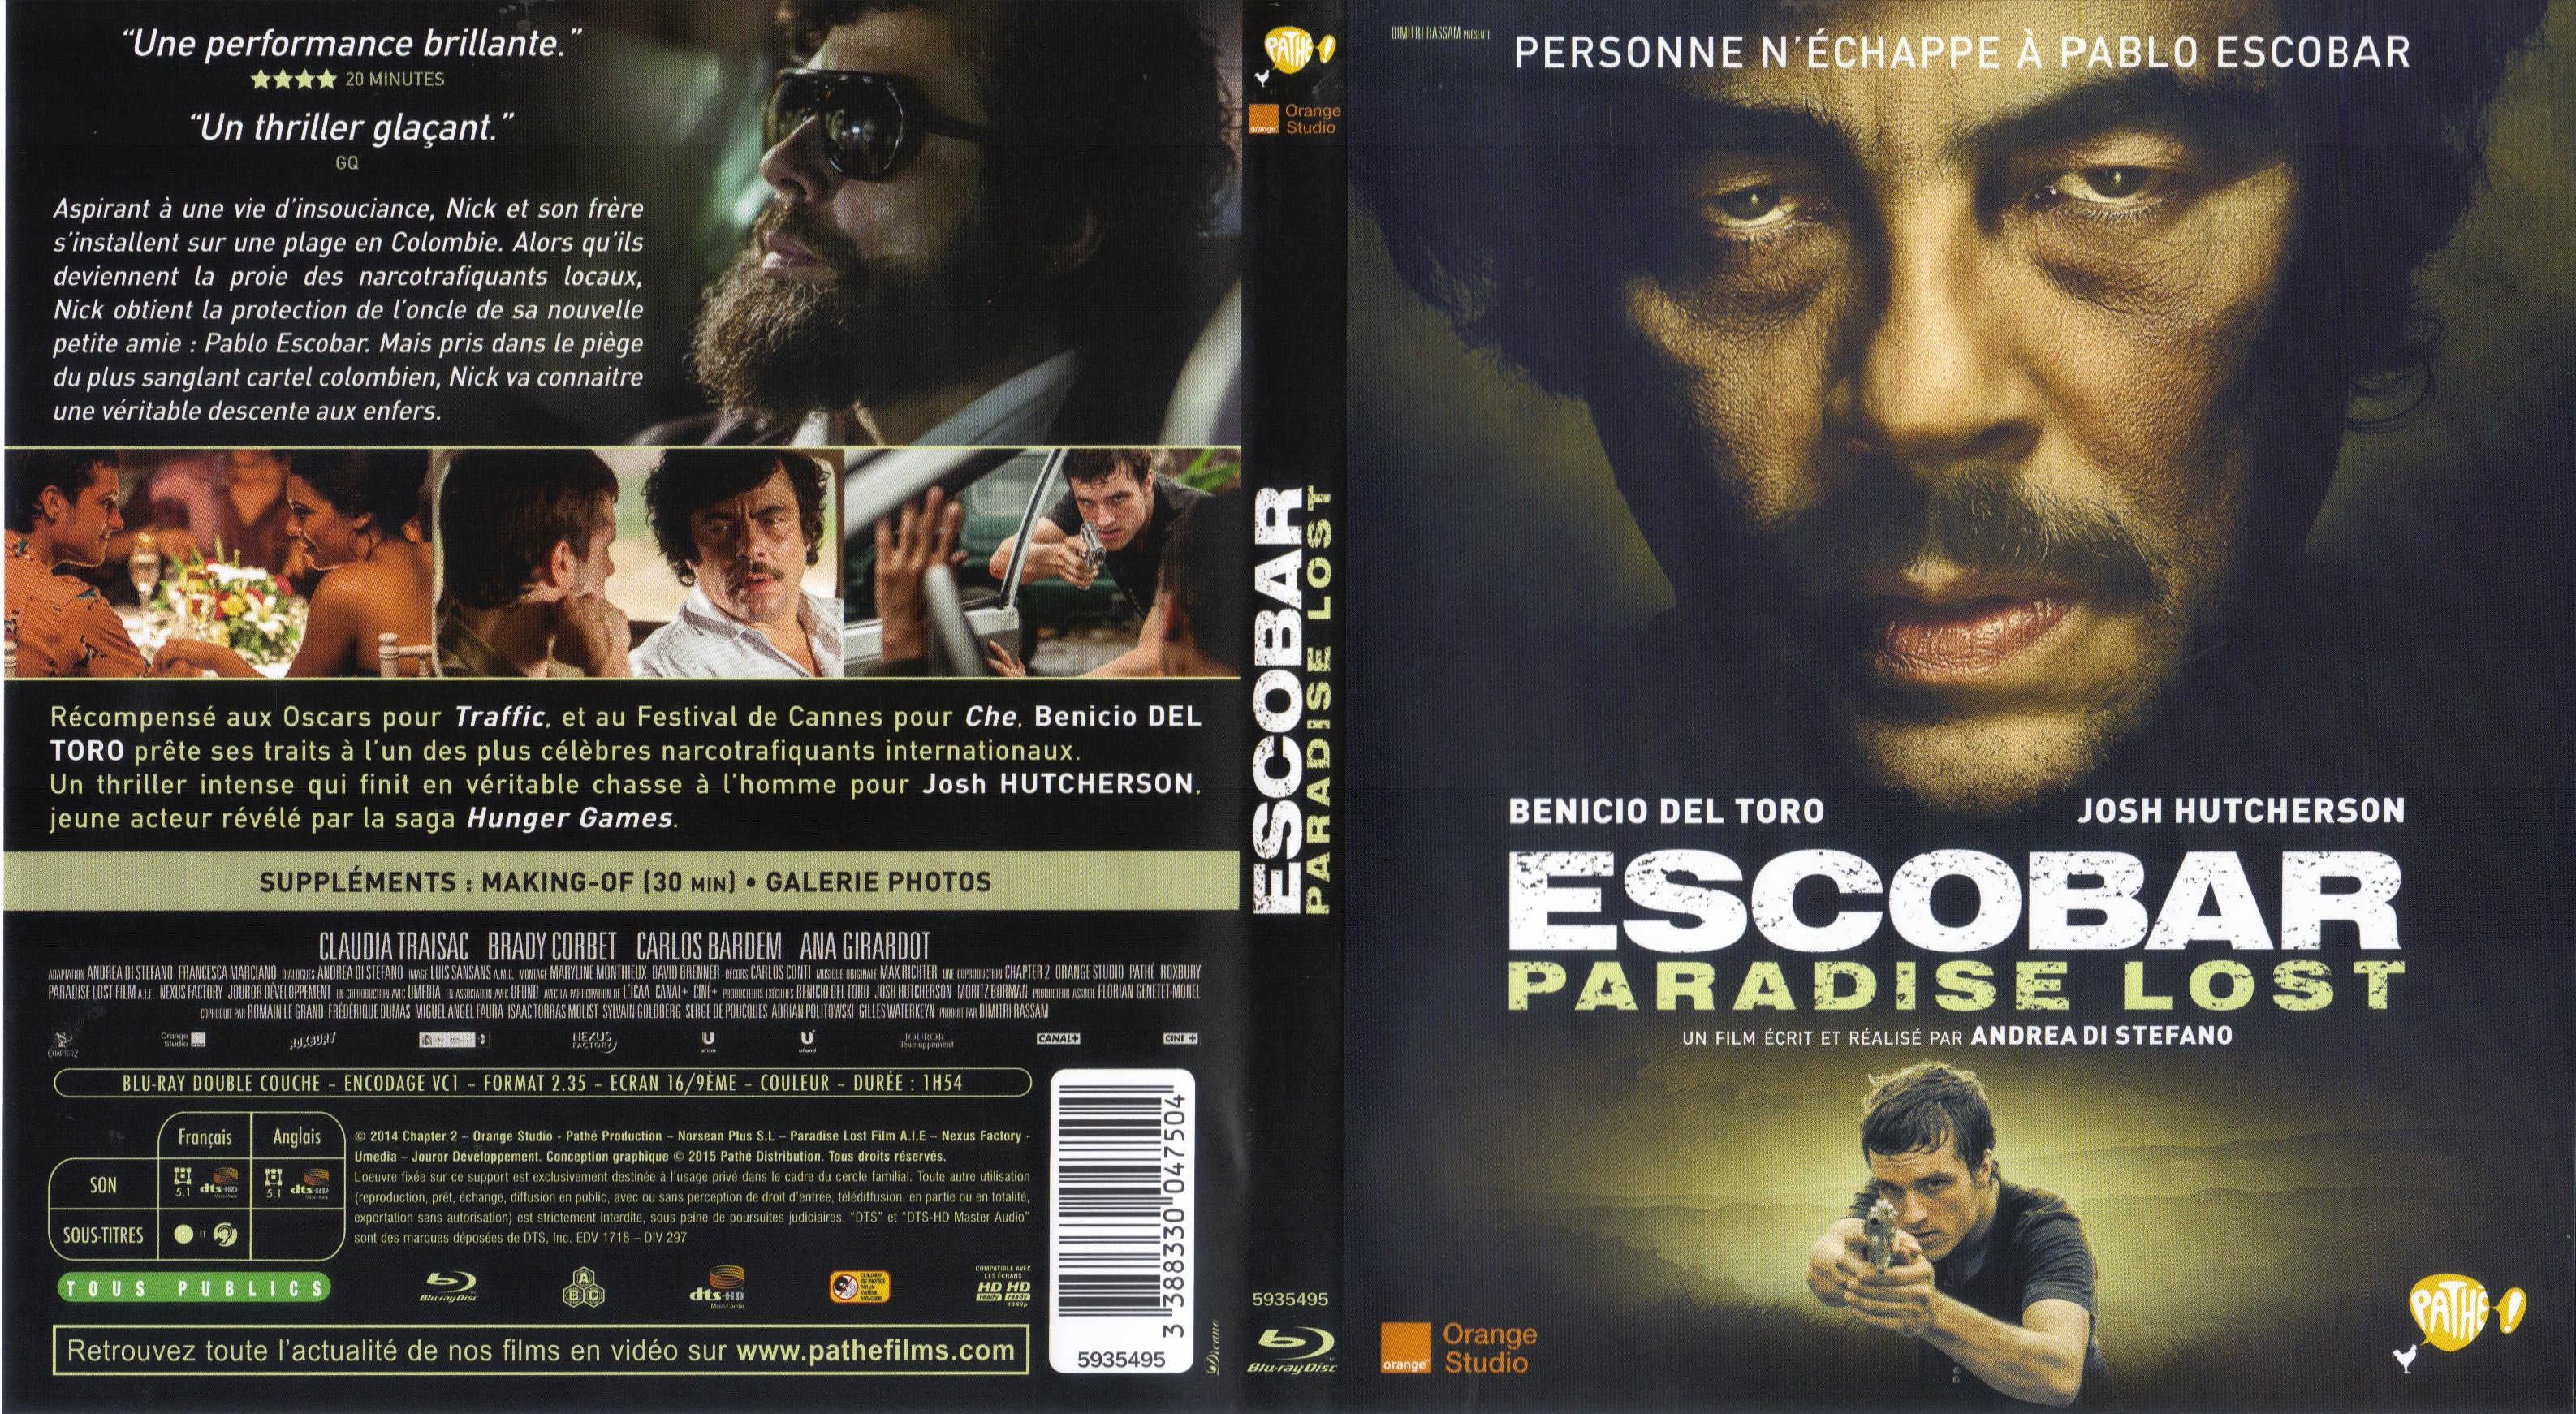 Jaquette DVD Escobar Paradise Lost (BLU-RAY)